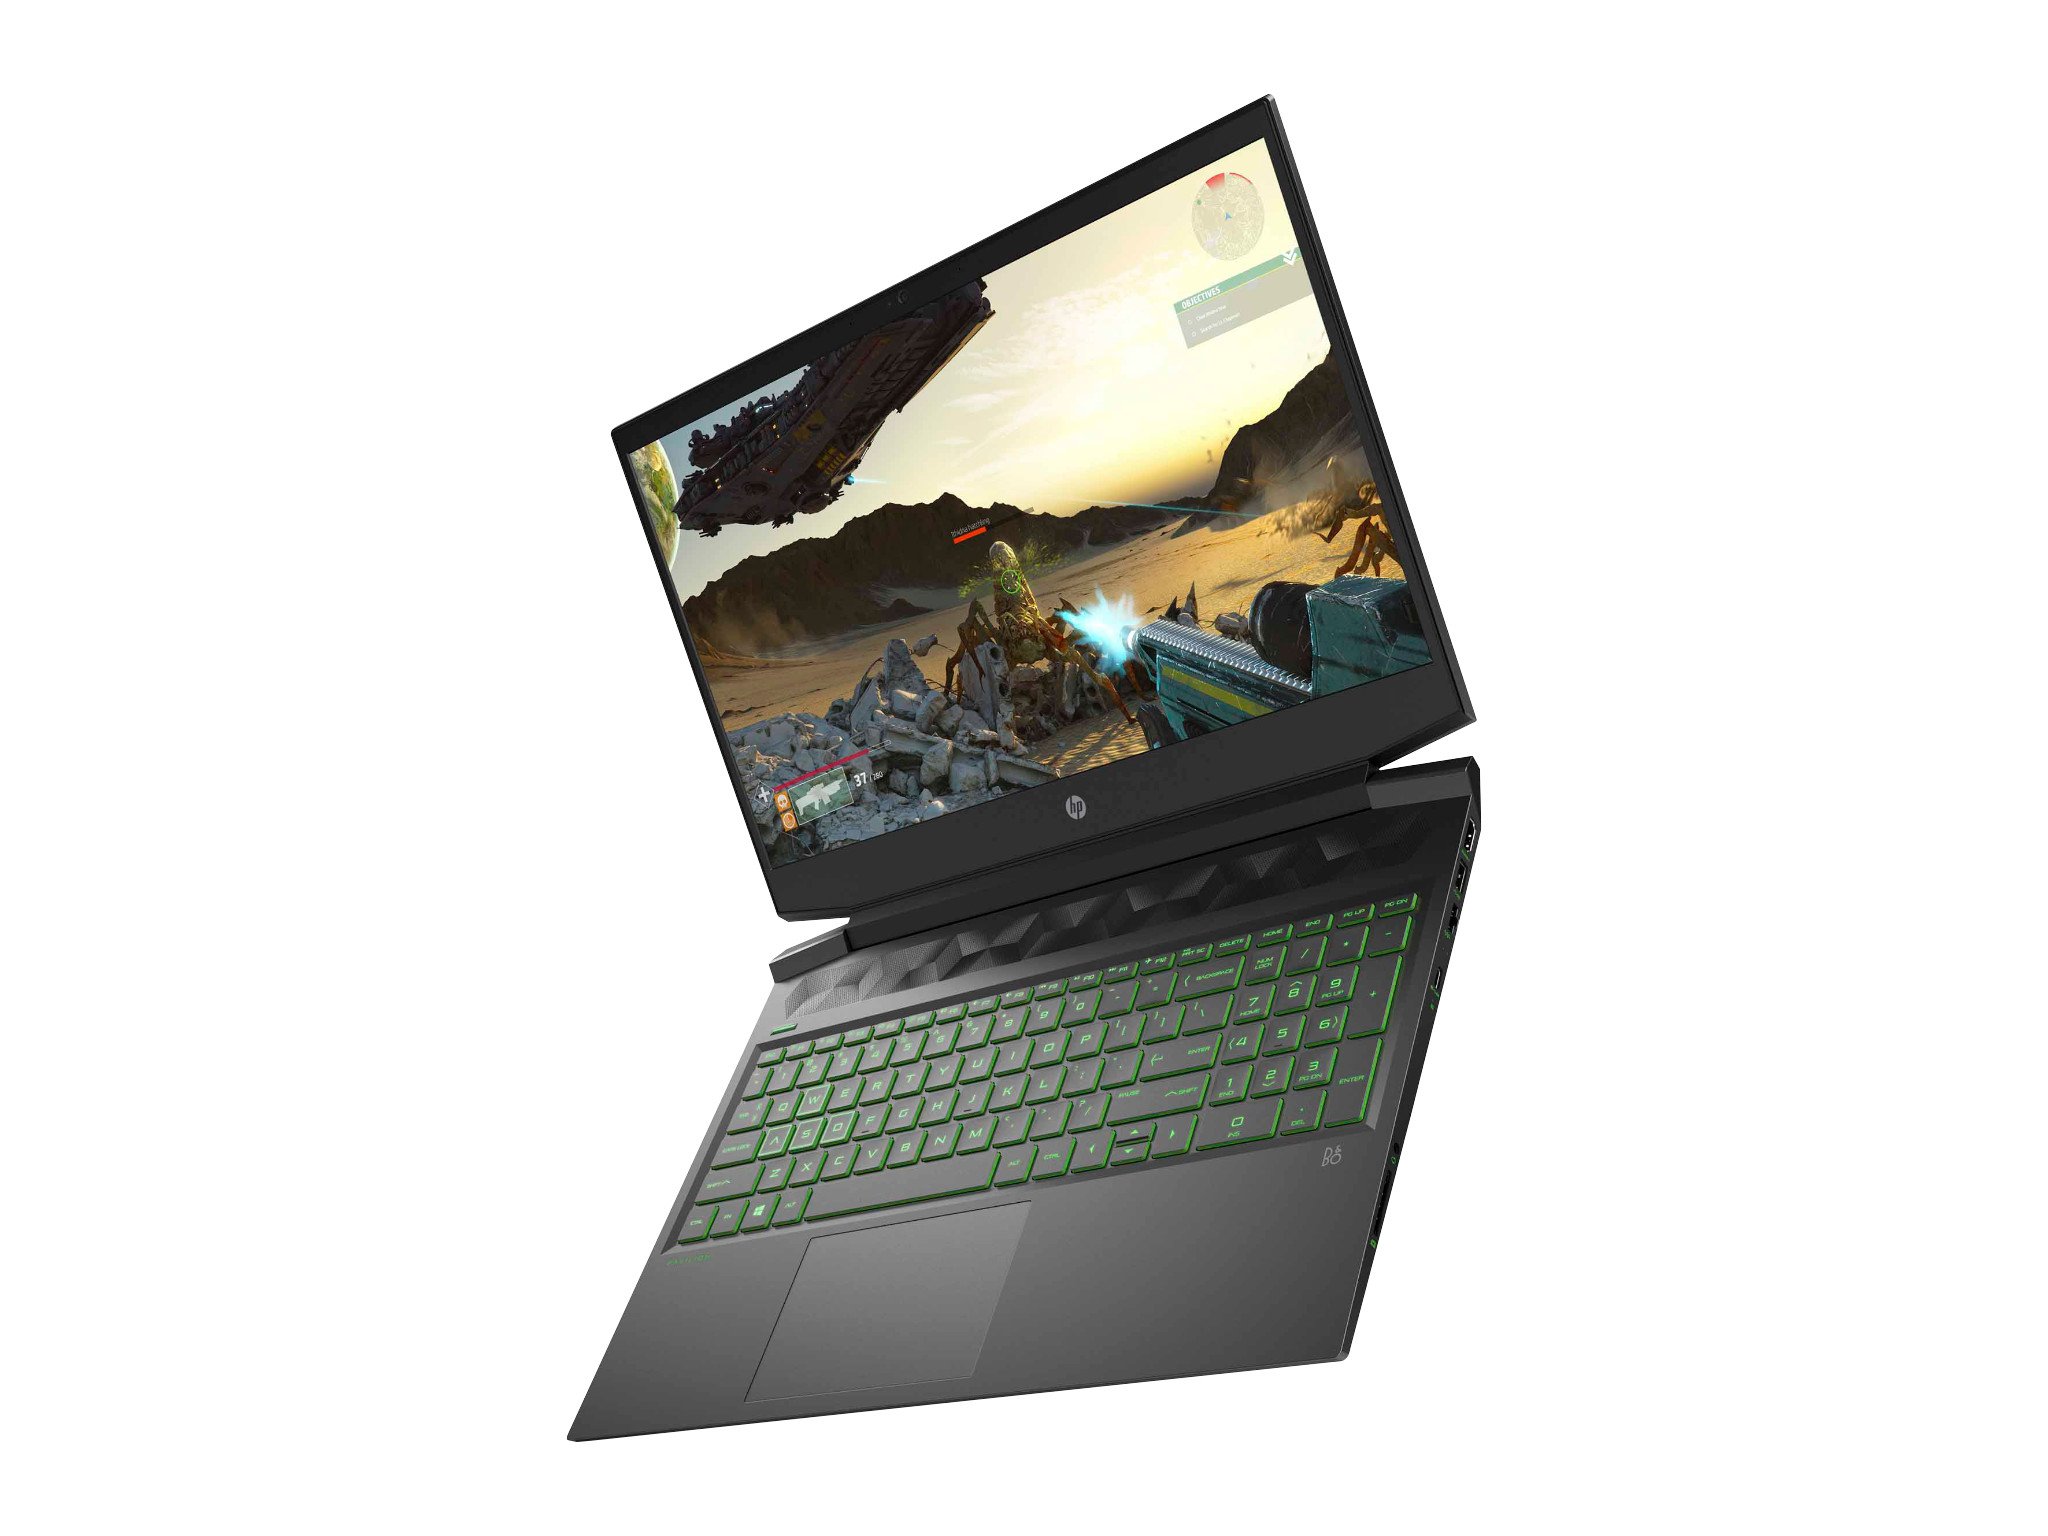 HP unveils its first 16-inch gaming laptop, the Pavilion Gaming 16 ...